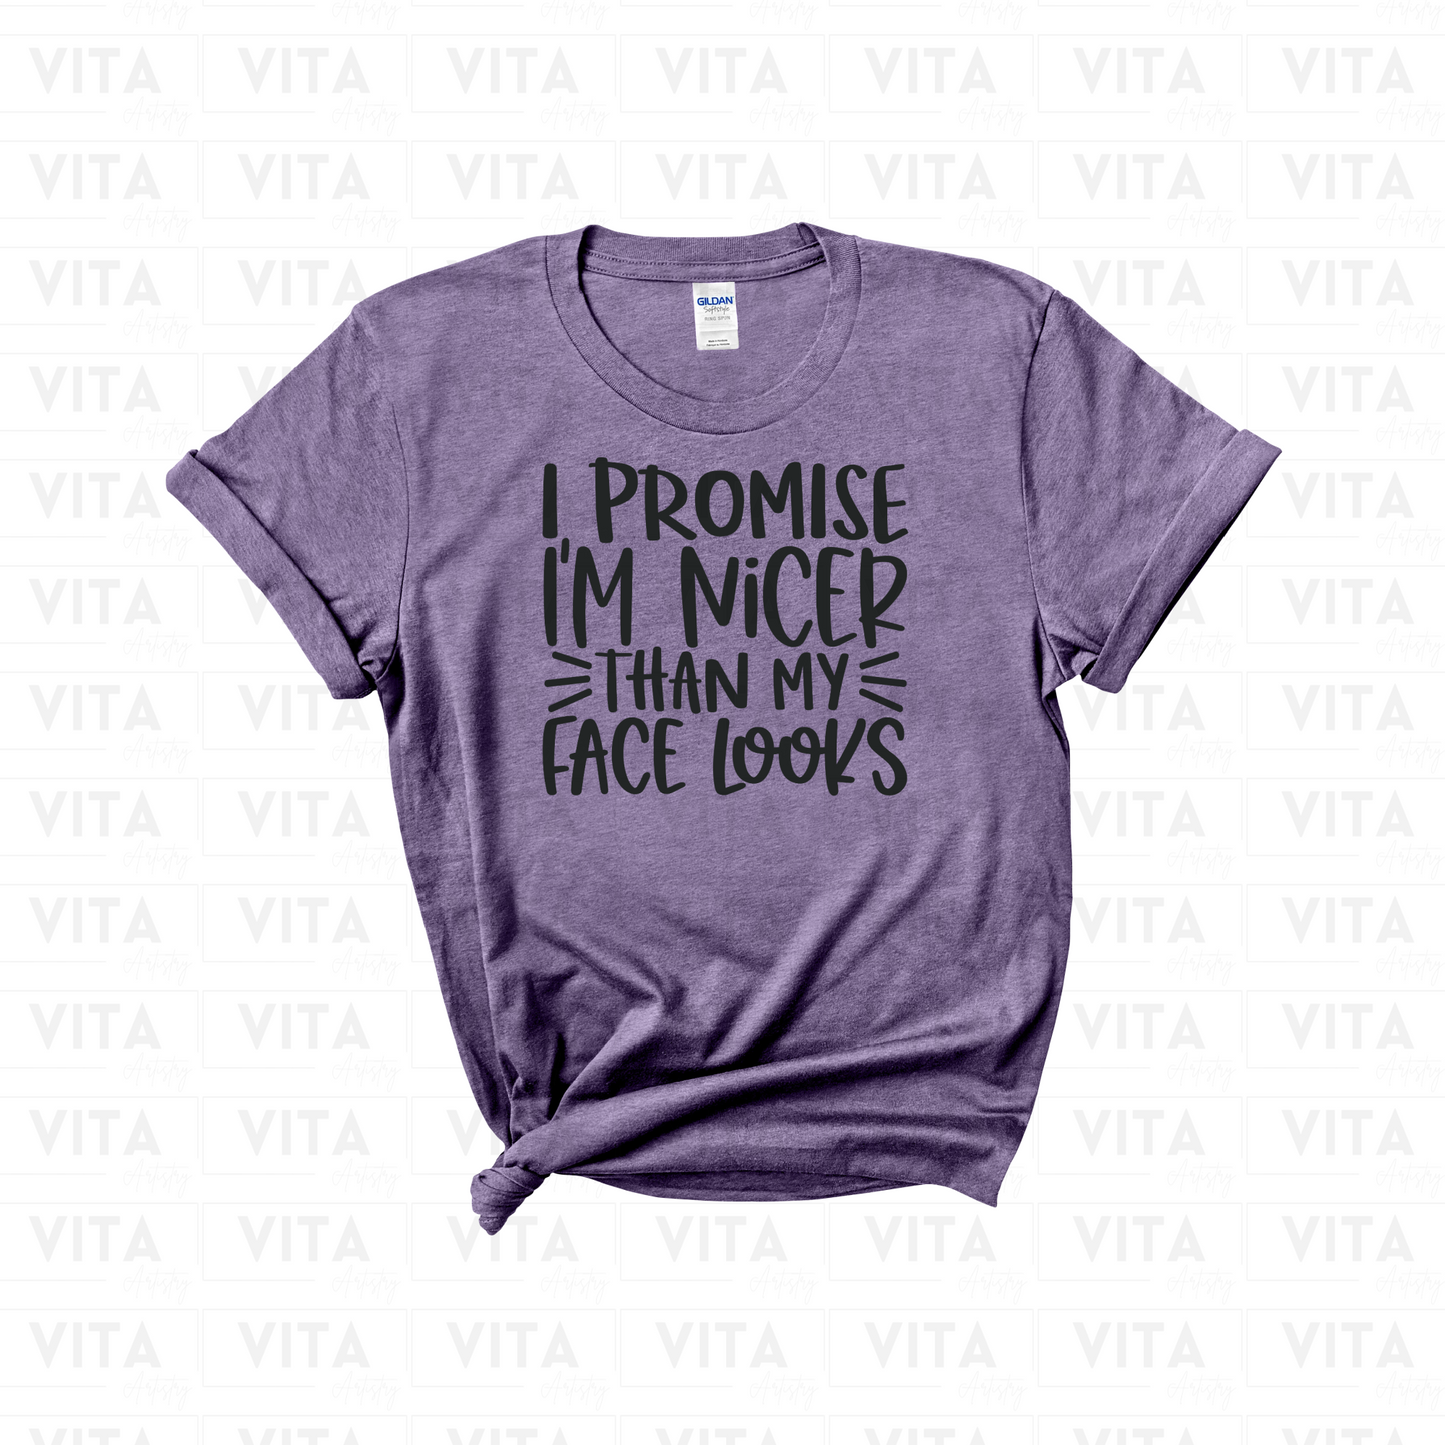 I Promise I'm Nicer Than My Face Looks - Sarcastic Soft Style T-Shirt (Choose your shirt color)